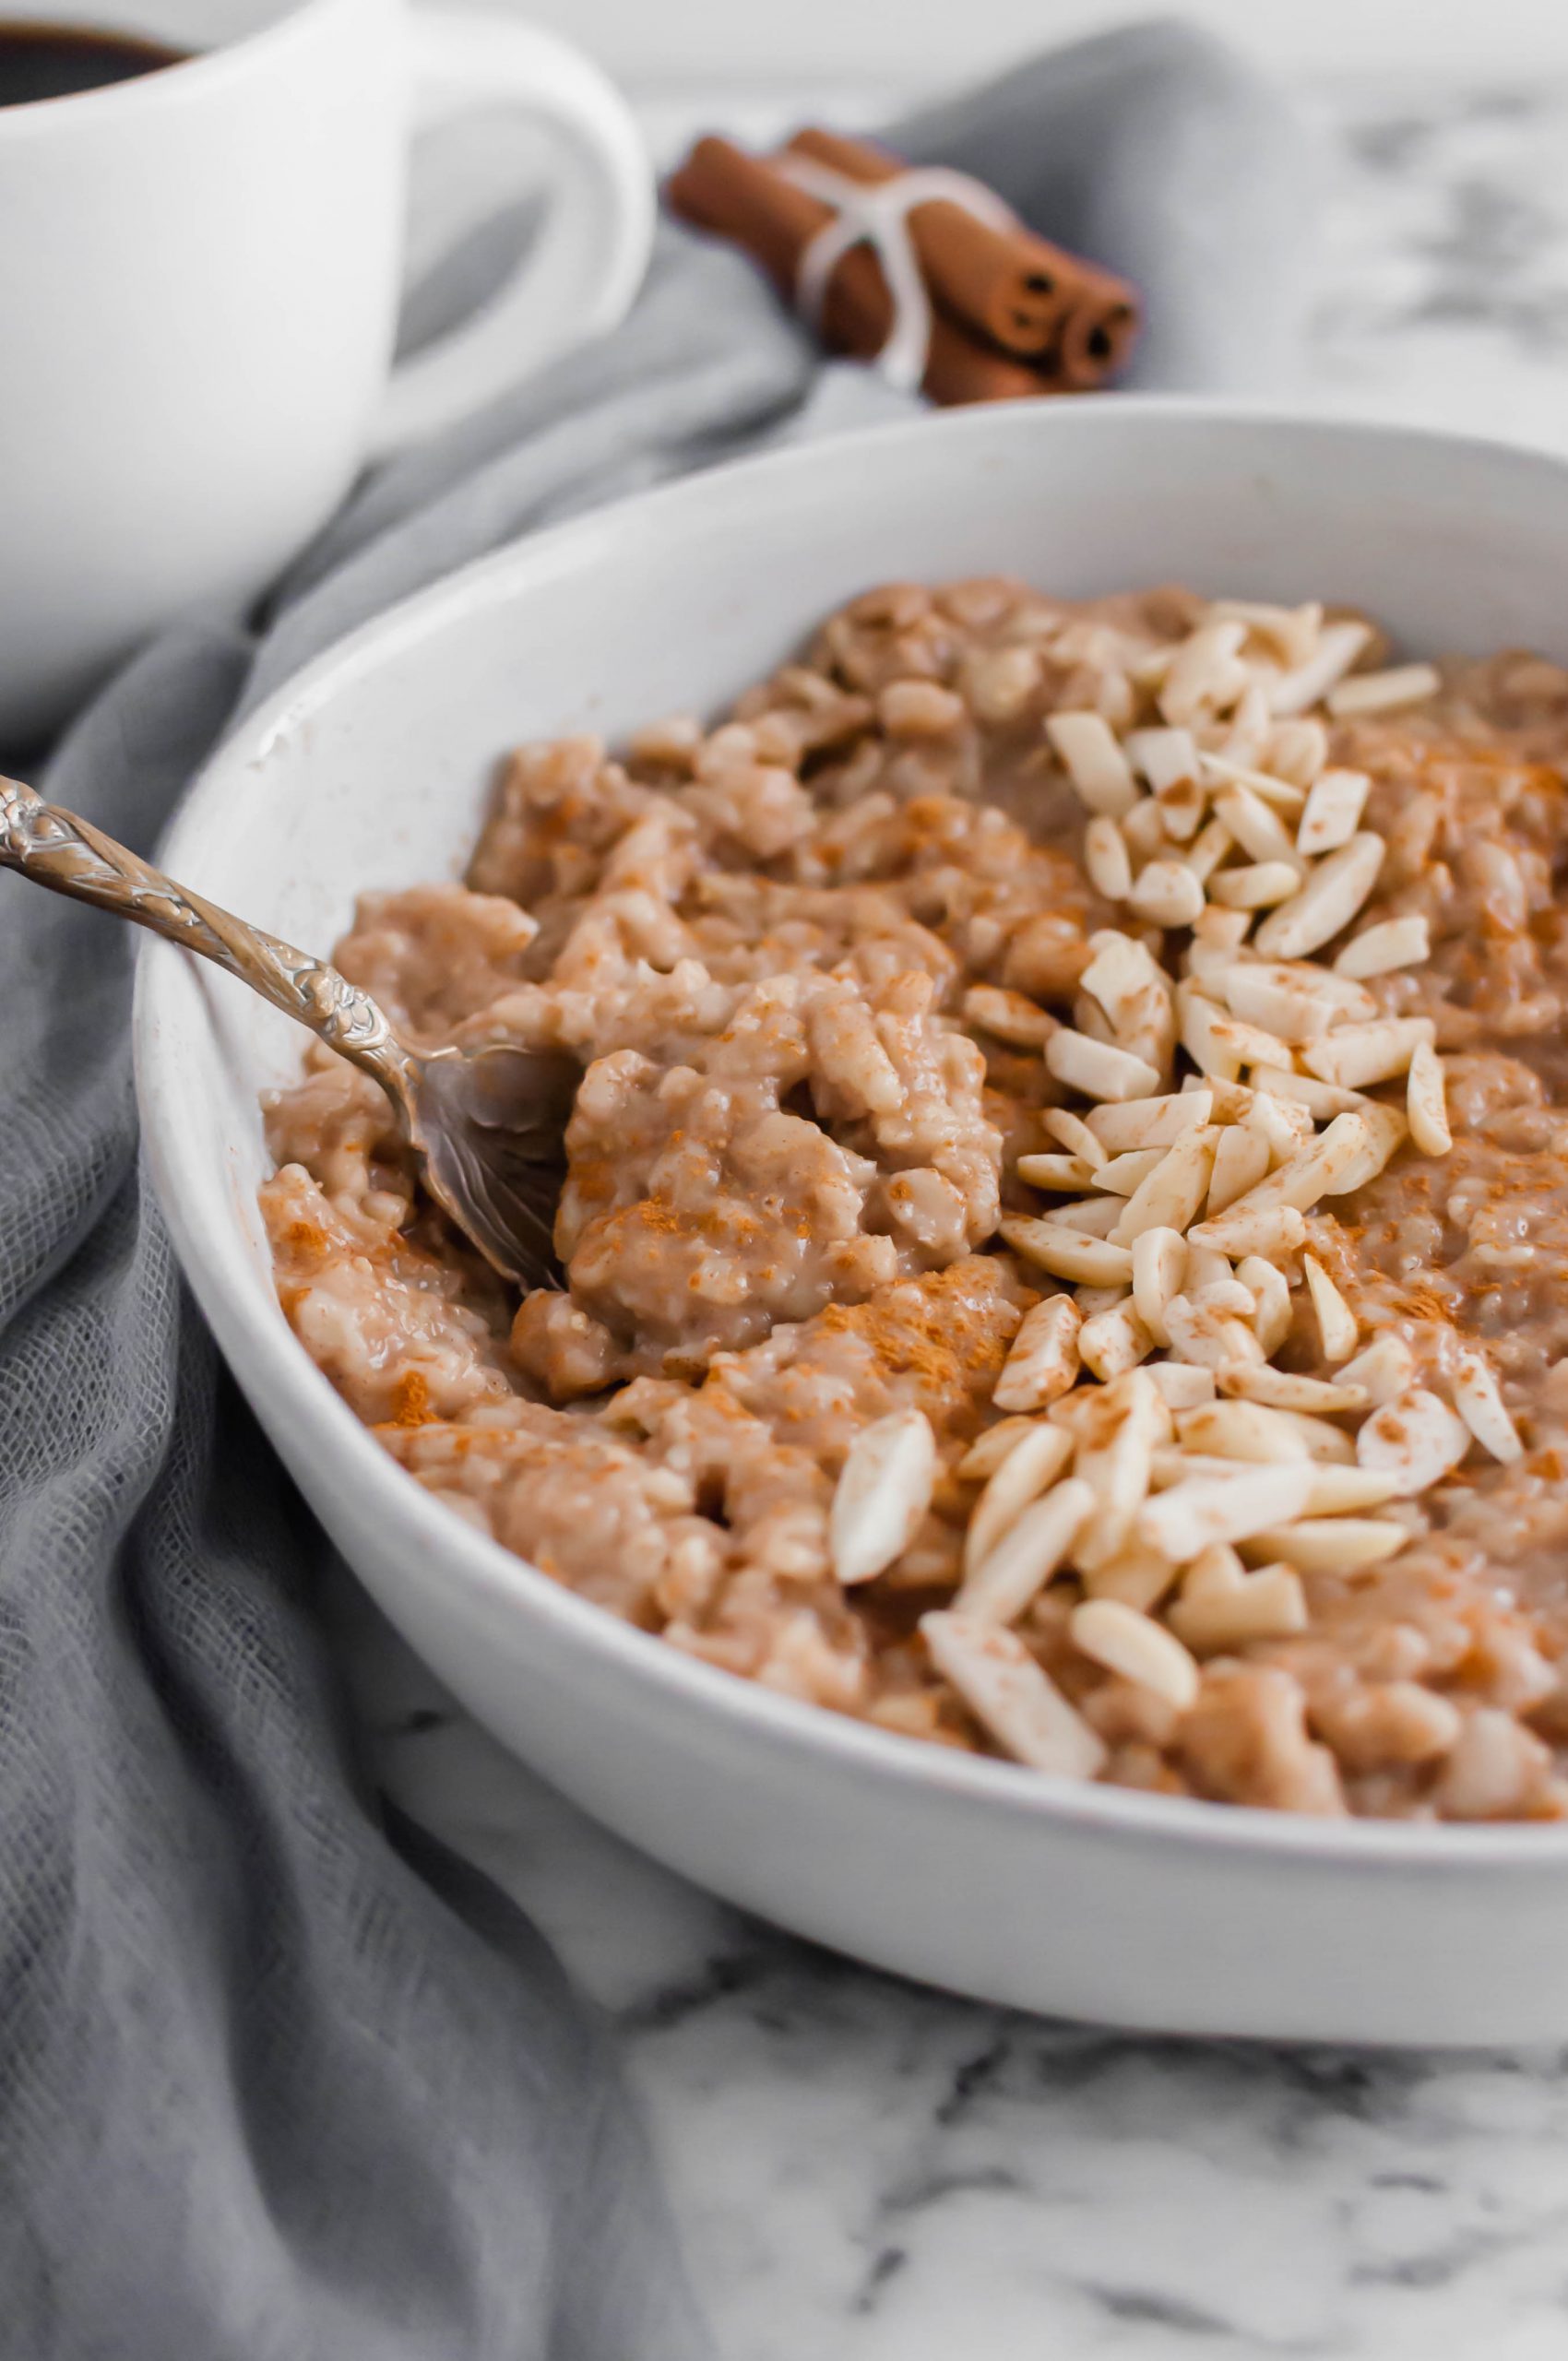 This Brown Sugar Cinnamon Instant Pot Oatmeal couldn't get easier to make. The perfect breakfast for school mornings.